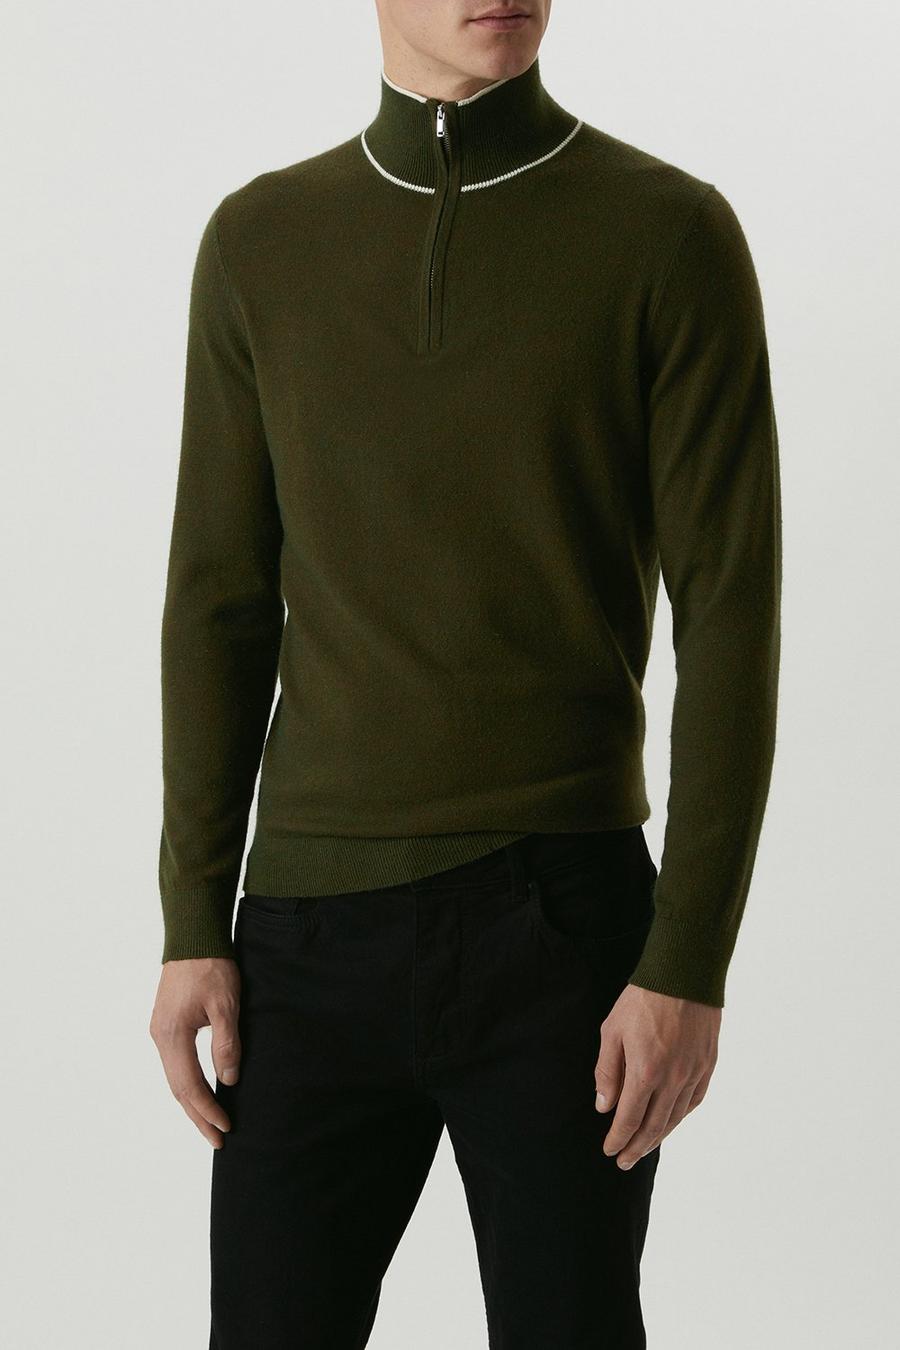 Super Soft Khaki Tipped 1/4 Zip Knitted Funnel